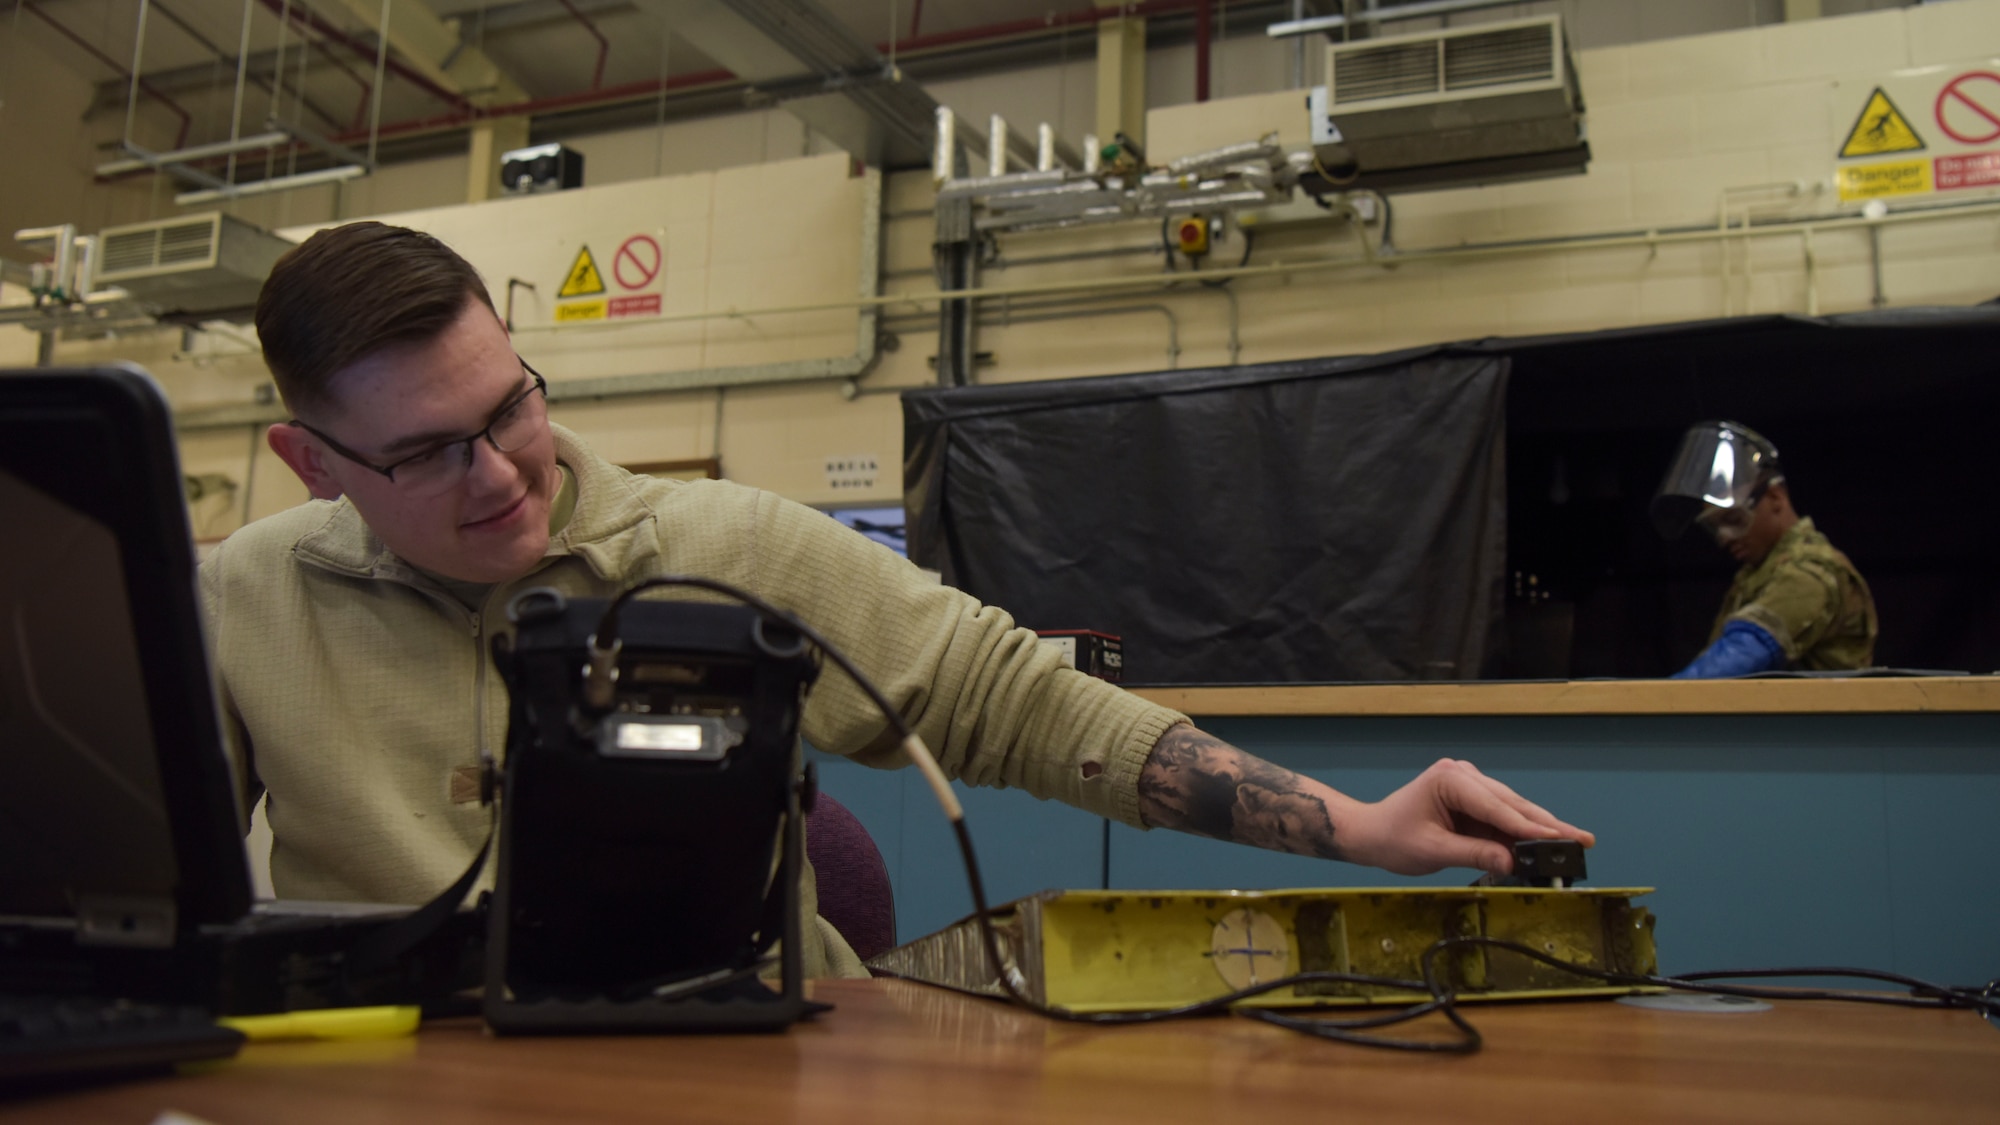 U.S. Air Force Airman 1st Class Alex Dixson, 100th Maintenance Squadron non-destructive inspection apprentice, uses an ultrasonic inspection tool to perform a bond test on a sample panel at RAF Mildenhall, England, Feb. 7, 2019. The tool is used to check for separation in parts, finding potential weak points throughout the panels of an aircraft.  (U.S. Air Force photo by Airman 1st Class Alexandria Lee)